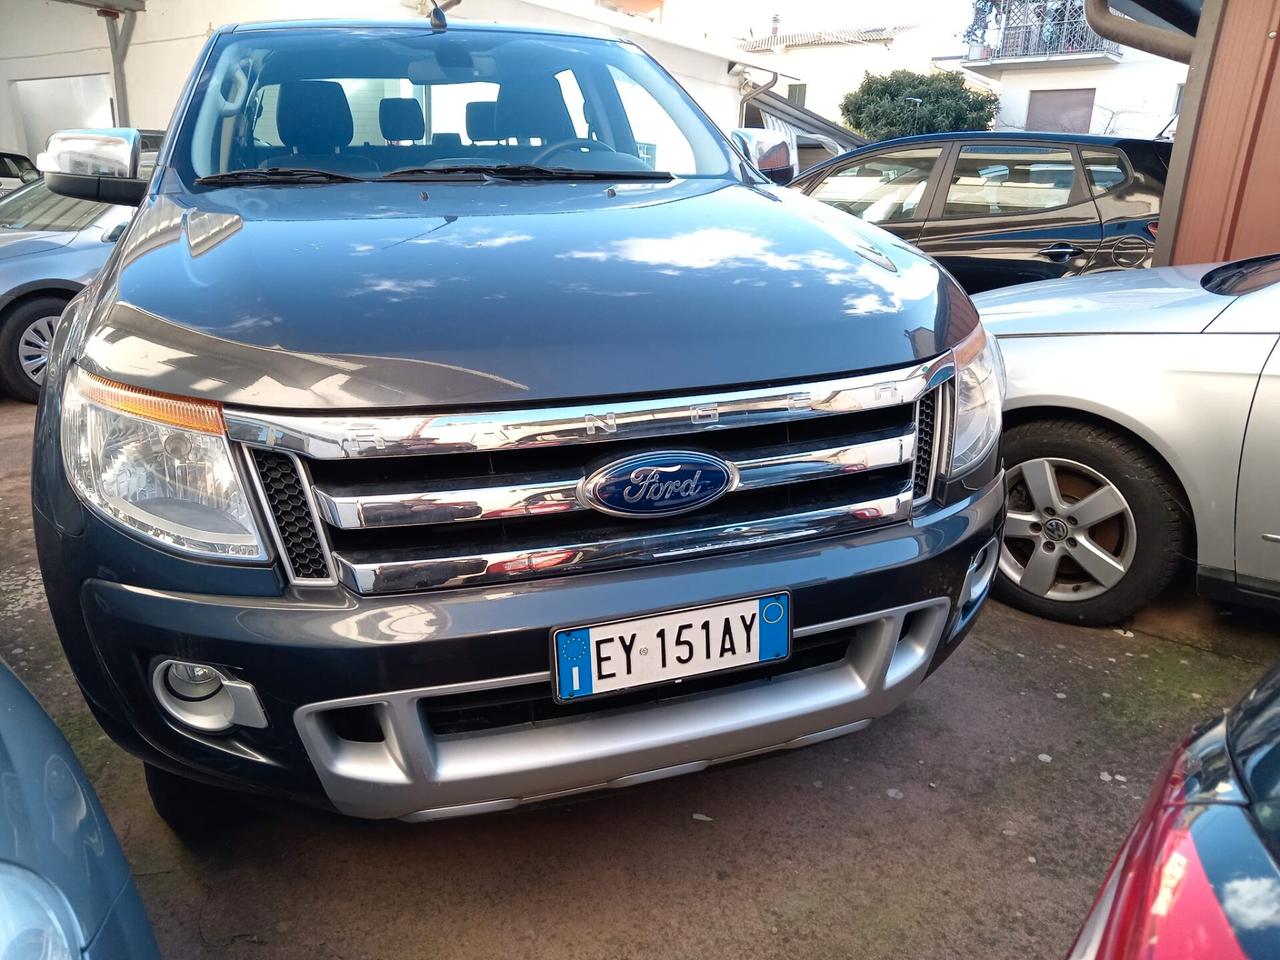 FORD RANGER LIMITED AUTOM 4X4